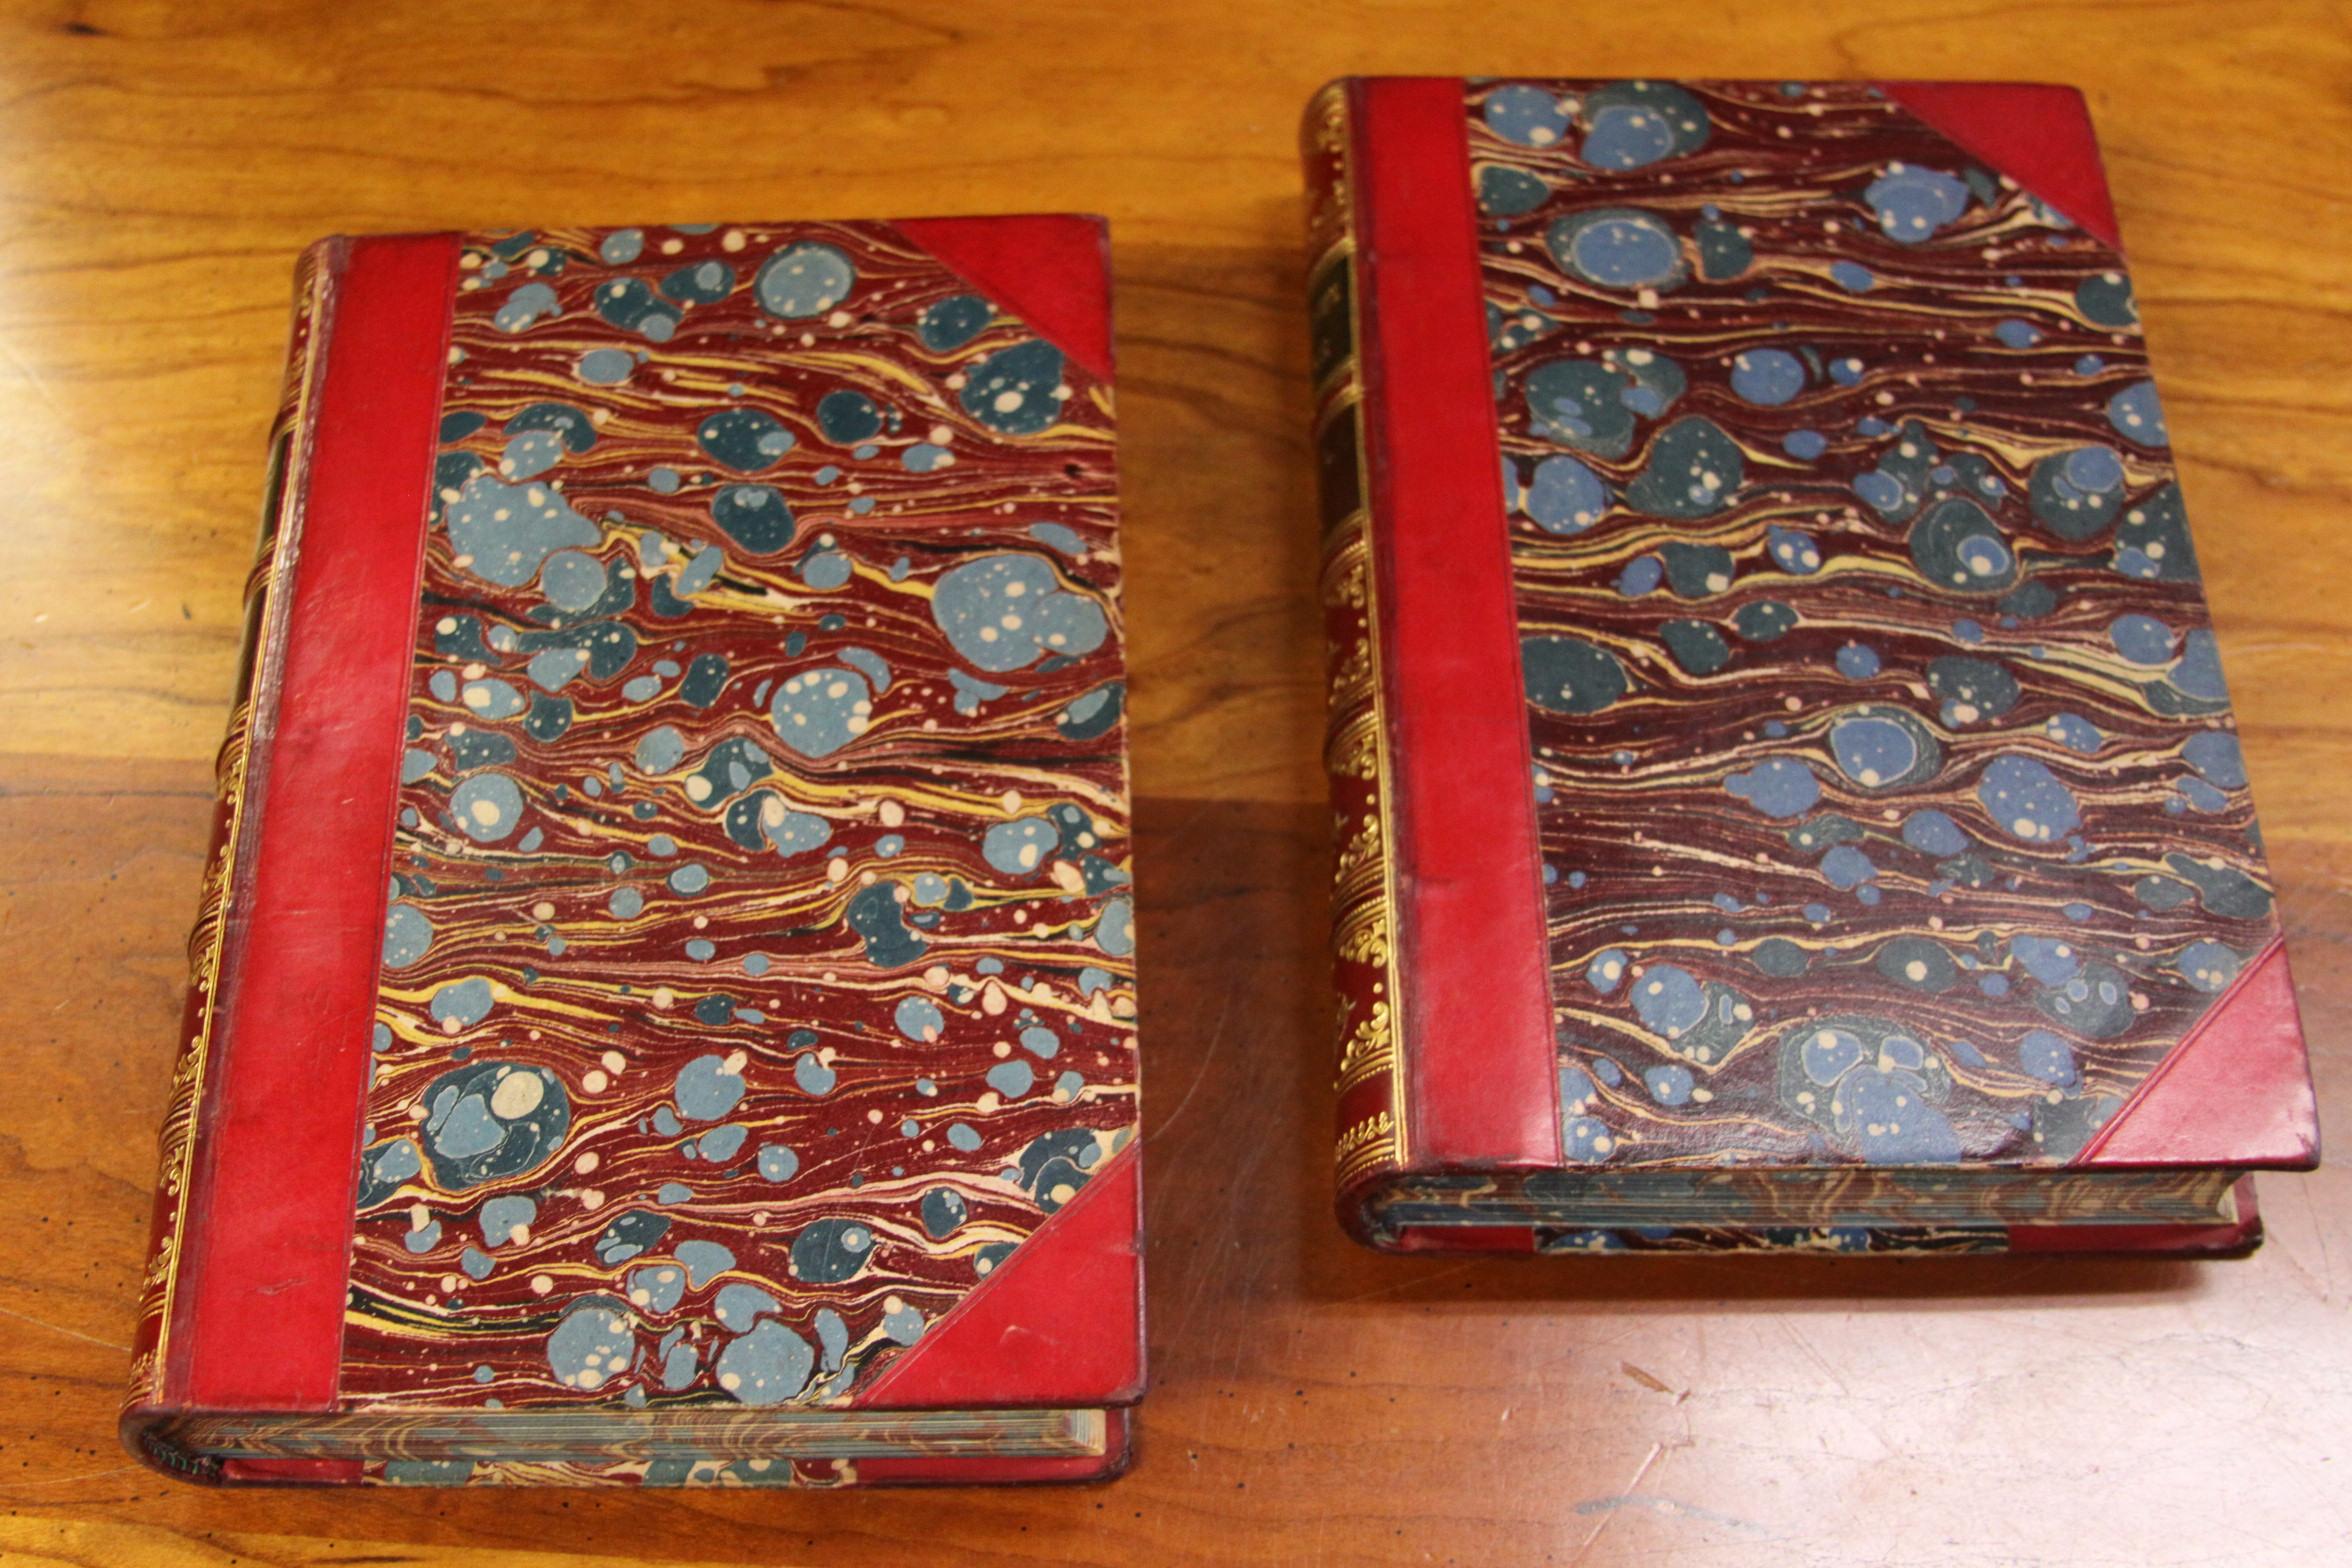 Antique books. Ten volumes. The works of Henry Fielding with essay and life. Published: London by Bickers and Son 1894. Bound in three quarter red calf, marbled boards, floral gilt motif to spine, gilt titles, raised bands, green and maroon titles